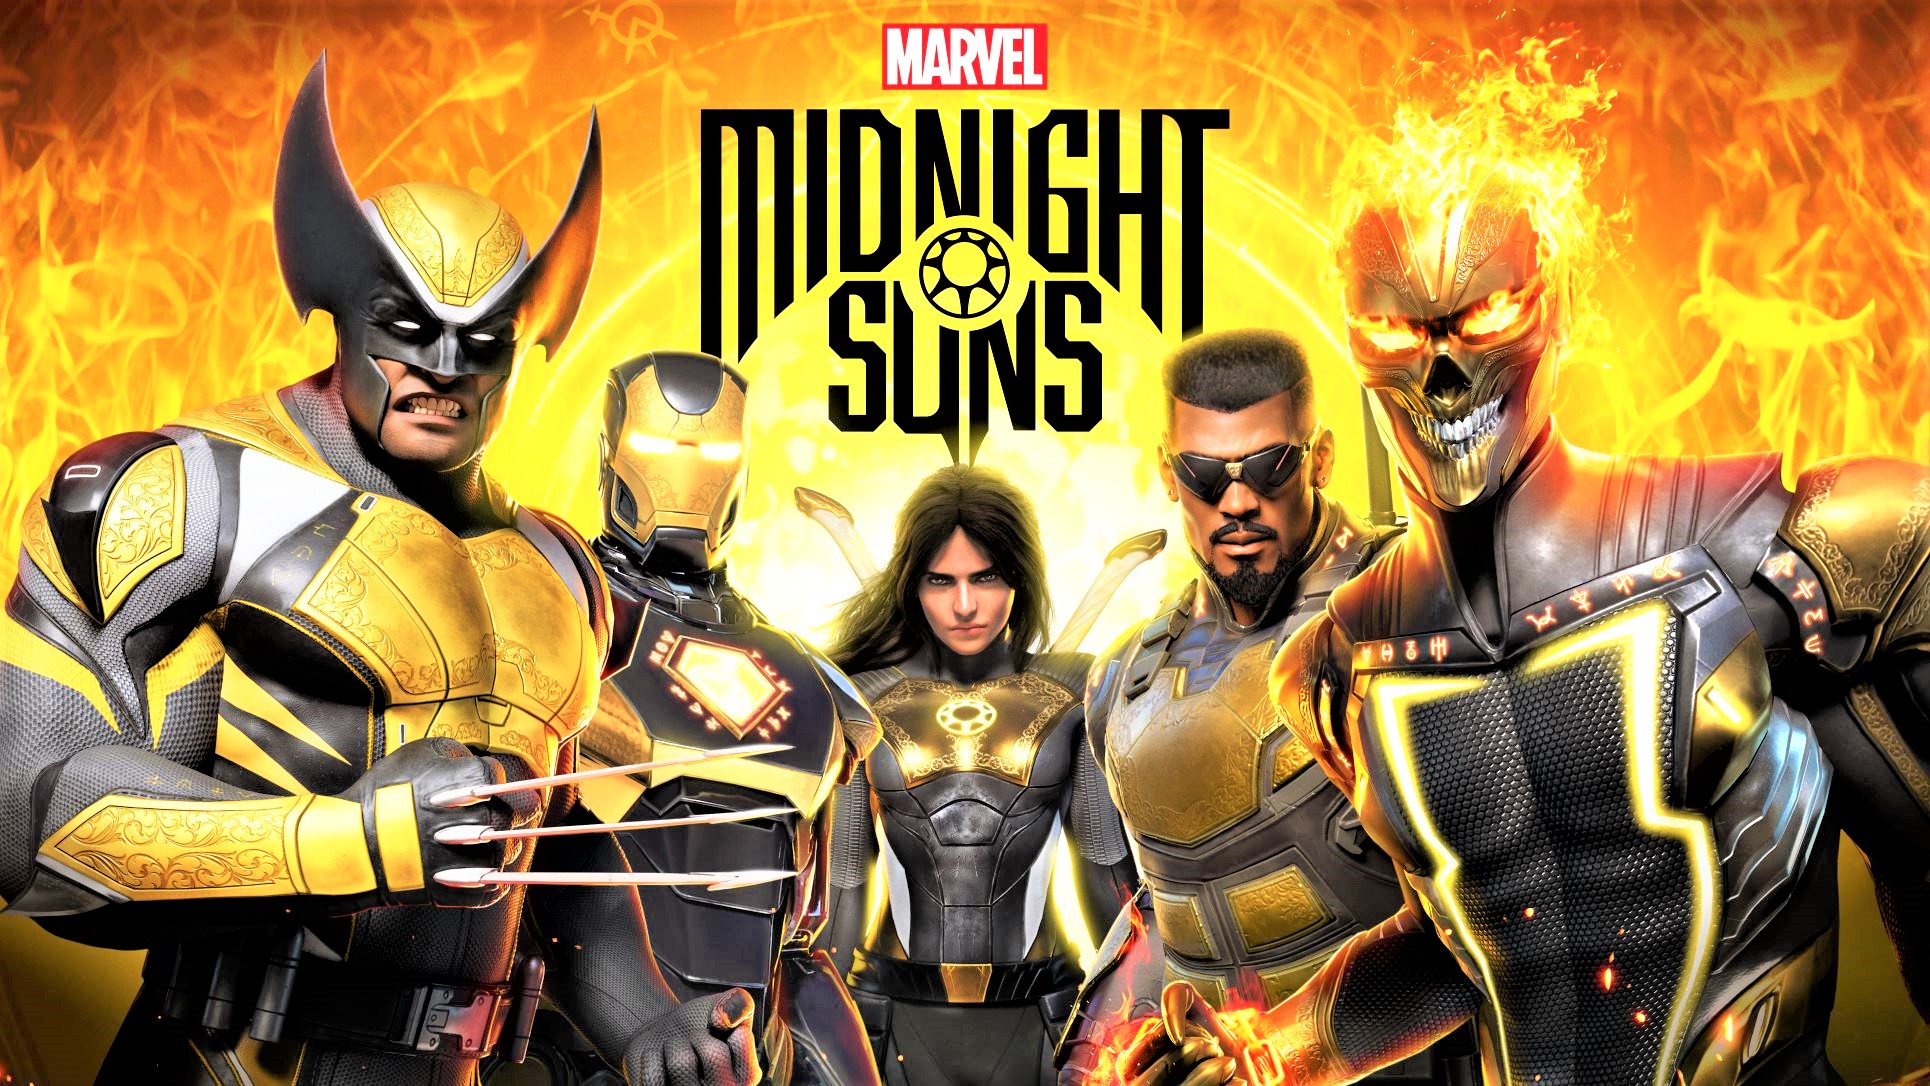 Marvel's Midnight Suns: High Pre-Release Ratings for XCOM Developers